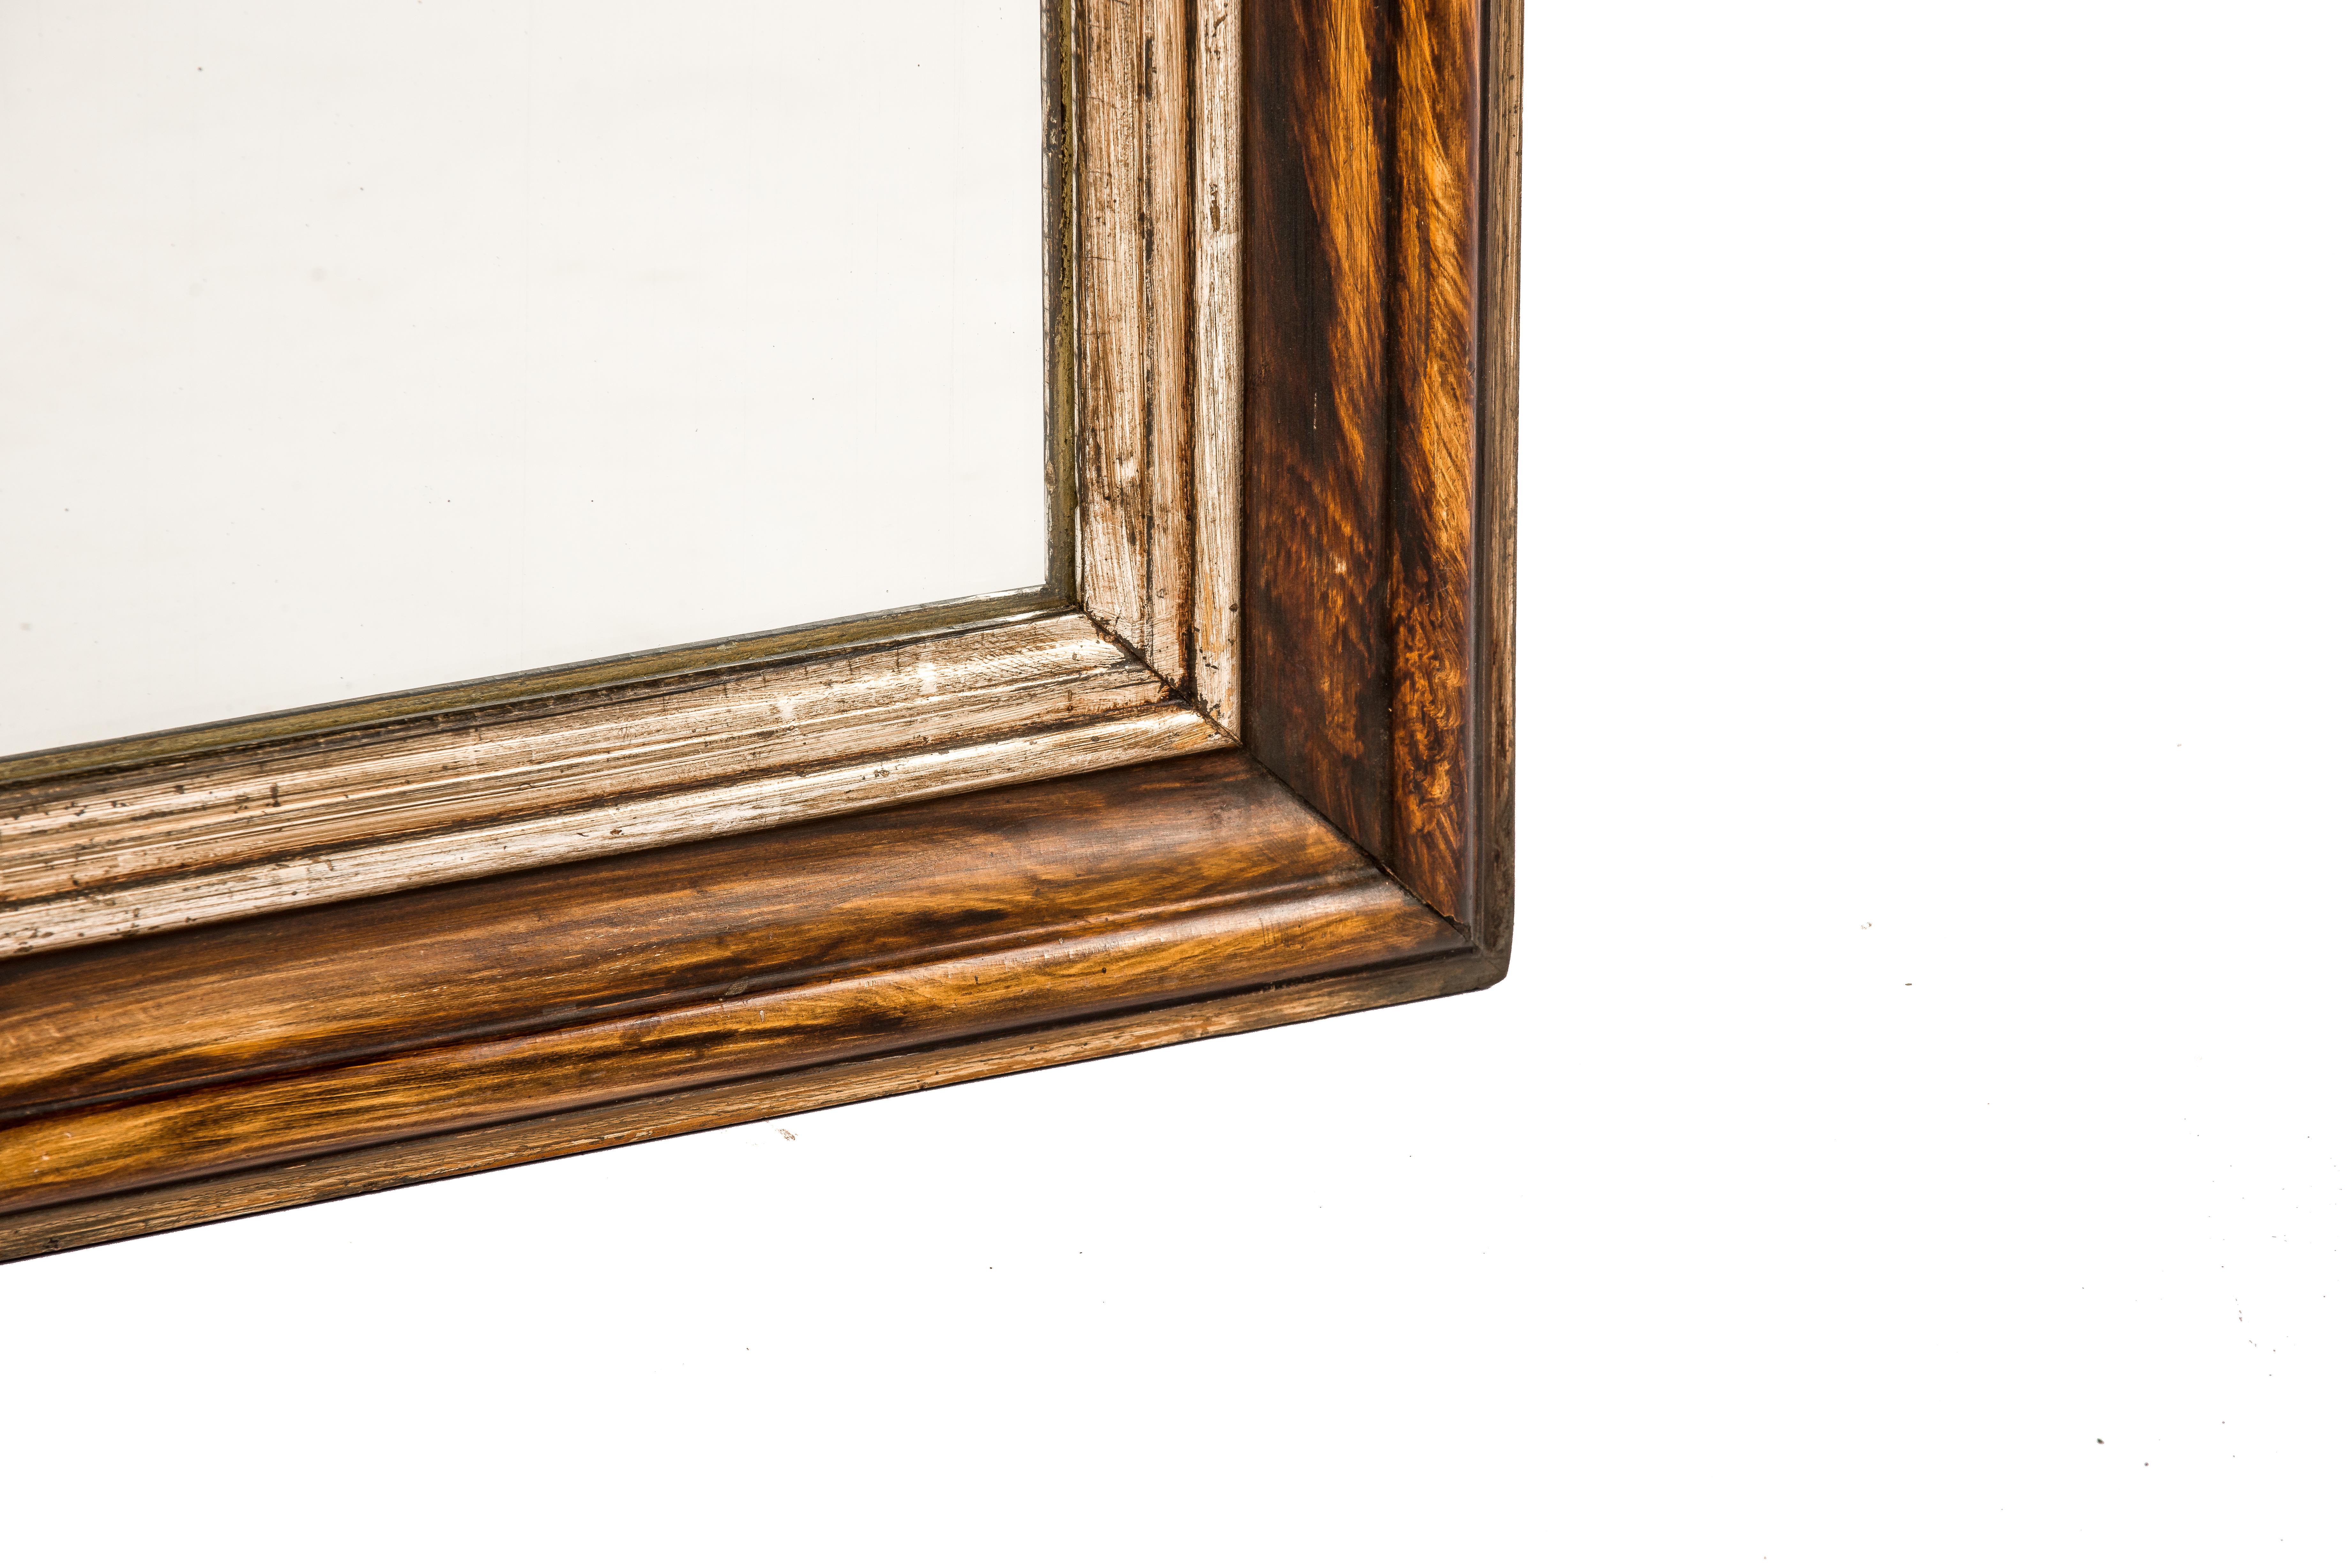 This Louis Philippe mirror was made in Northern France in the late 1800s. The mirror has a solid pine frame that was smoothened with gesso. The mirror frame is painted to resemble rosewood with a beautiful grain pattern. The most elevated part of